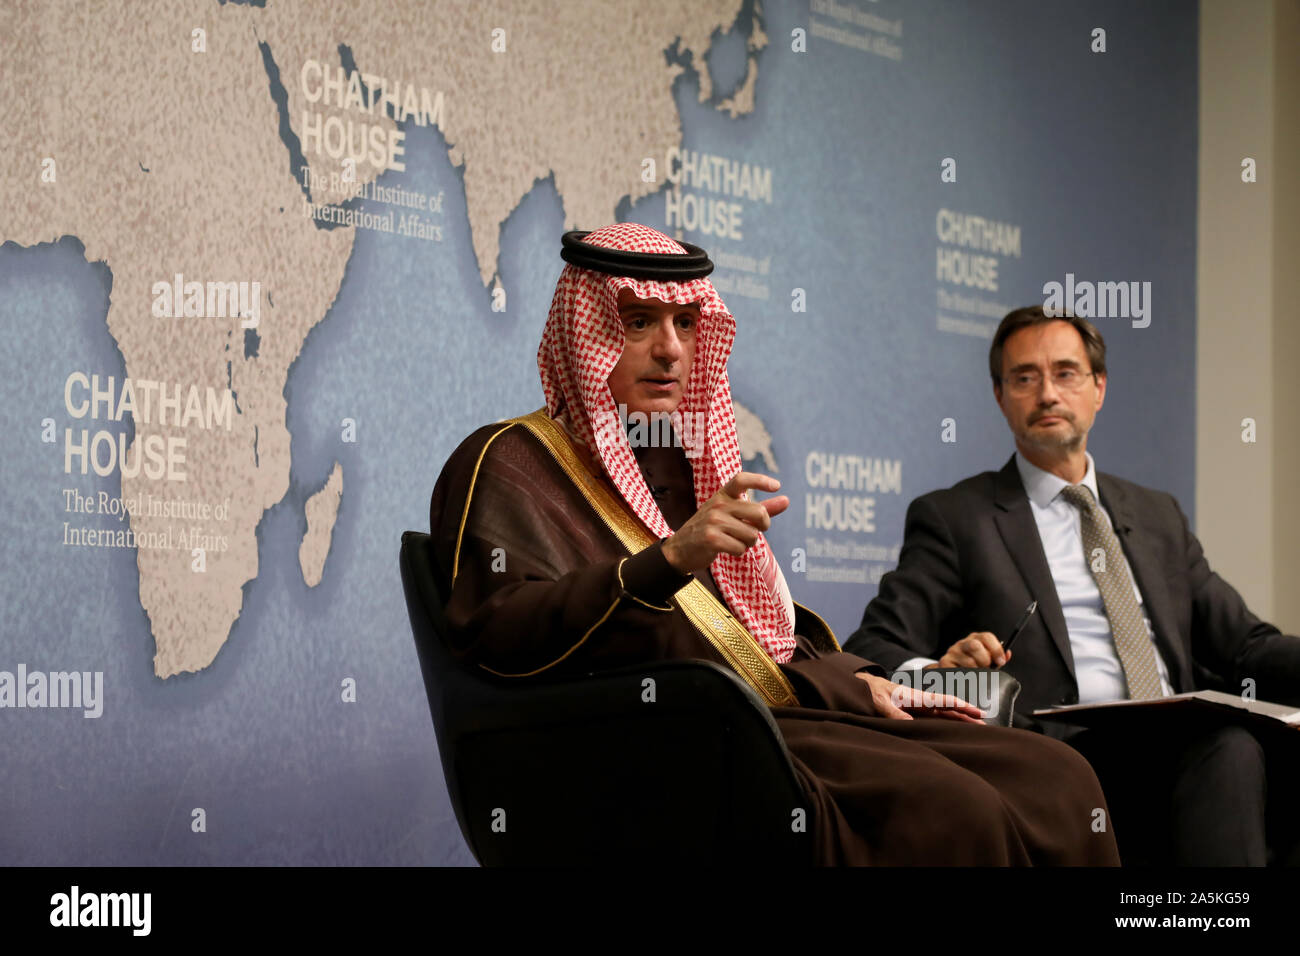 London / UK – October 14, 2019: Adel al-Jubeir, Saudi Arabia’s minister of state for foreign affairs, speaking at Chatham House on Saudi foreign policy, while Chatham House director Robin Niblett (R) looks on Stock Photo